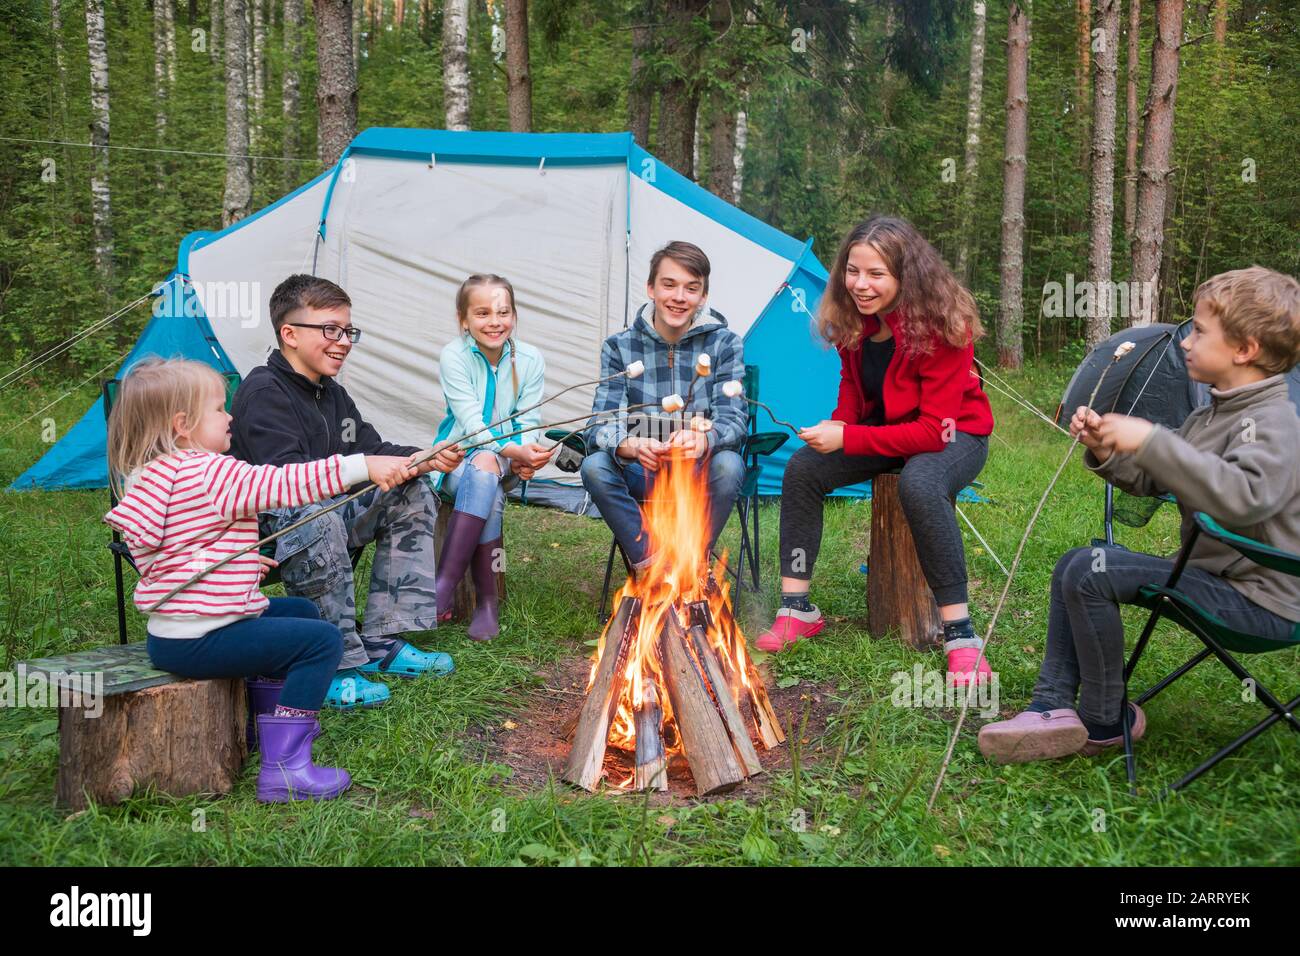 Six children of different age sitting together around burning bonfire having fun roasting marshmallows while camping in a summer forest. Camping tents Stock Photo